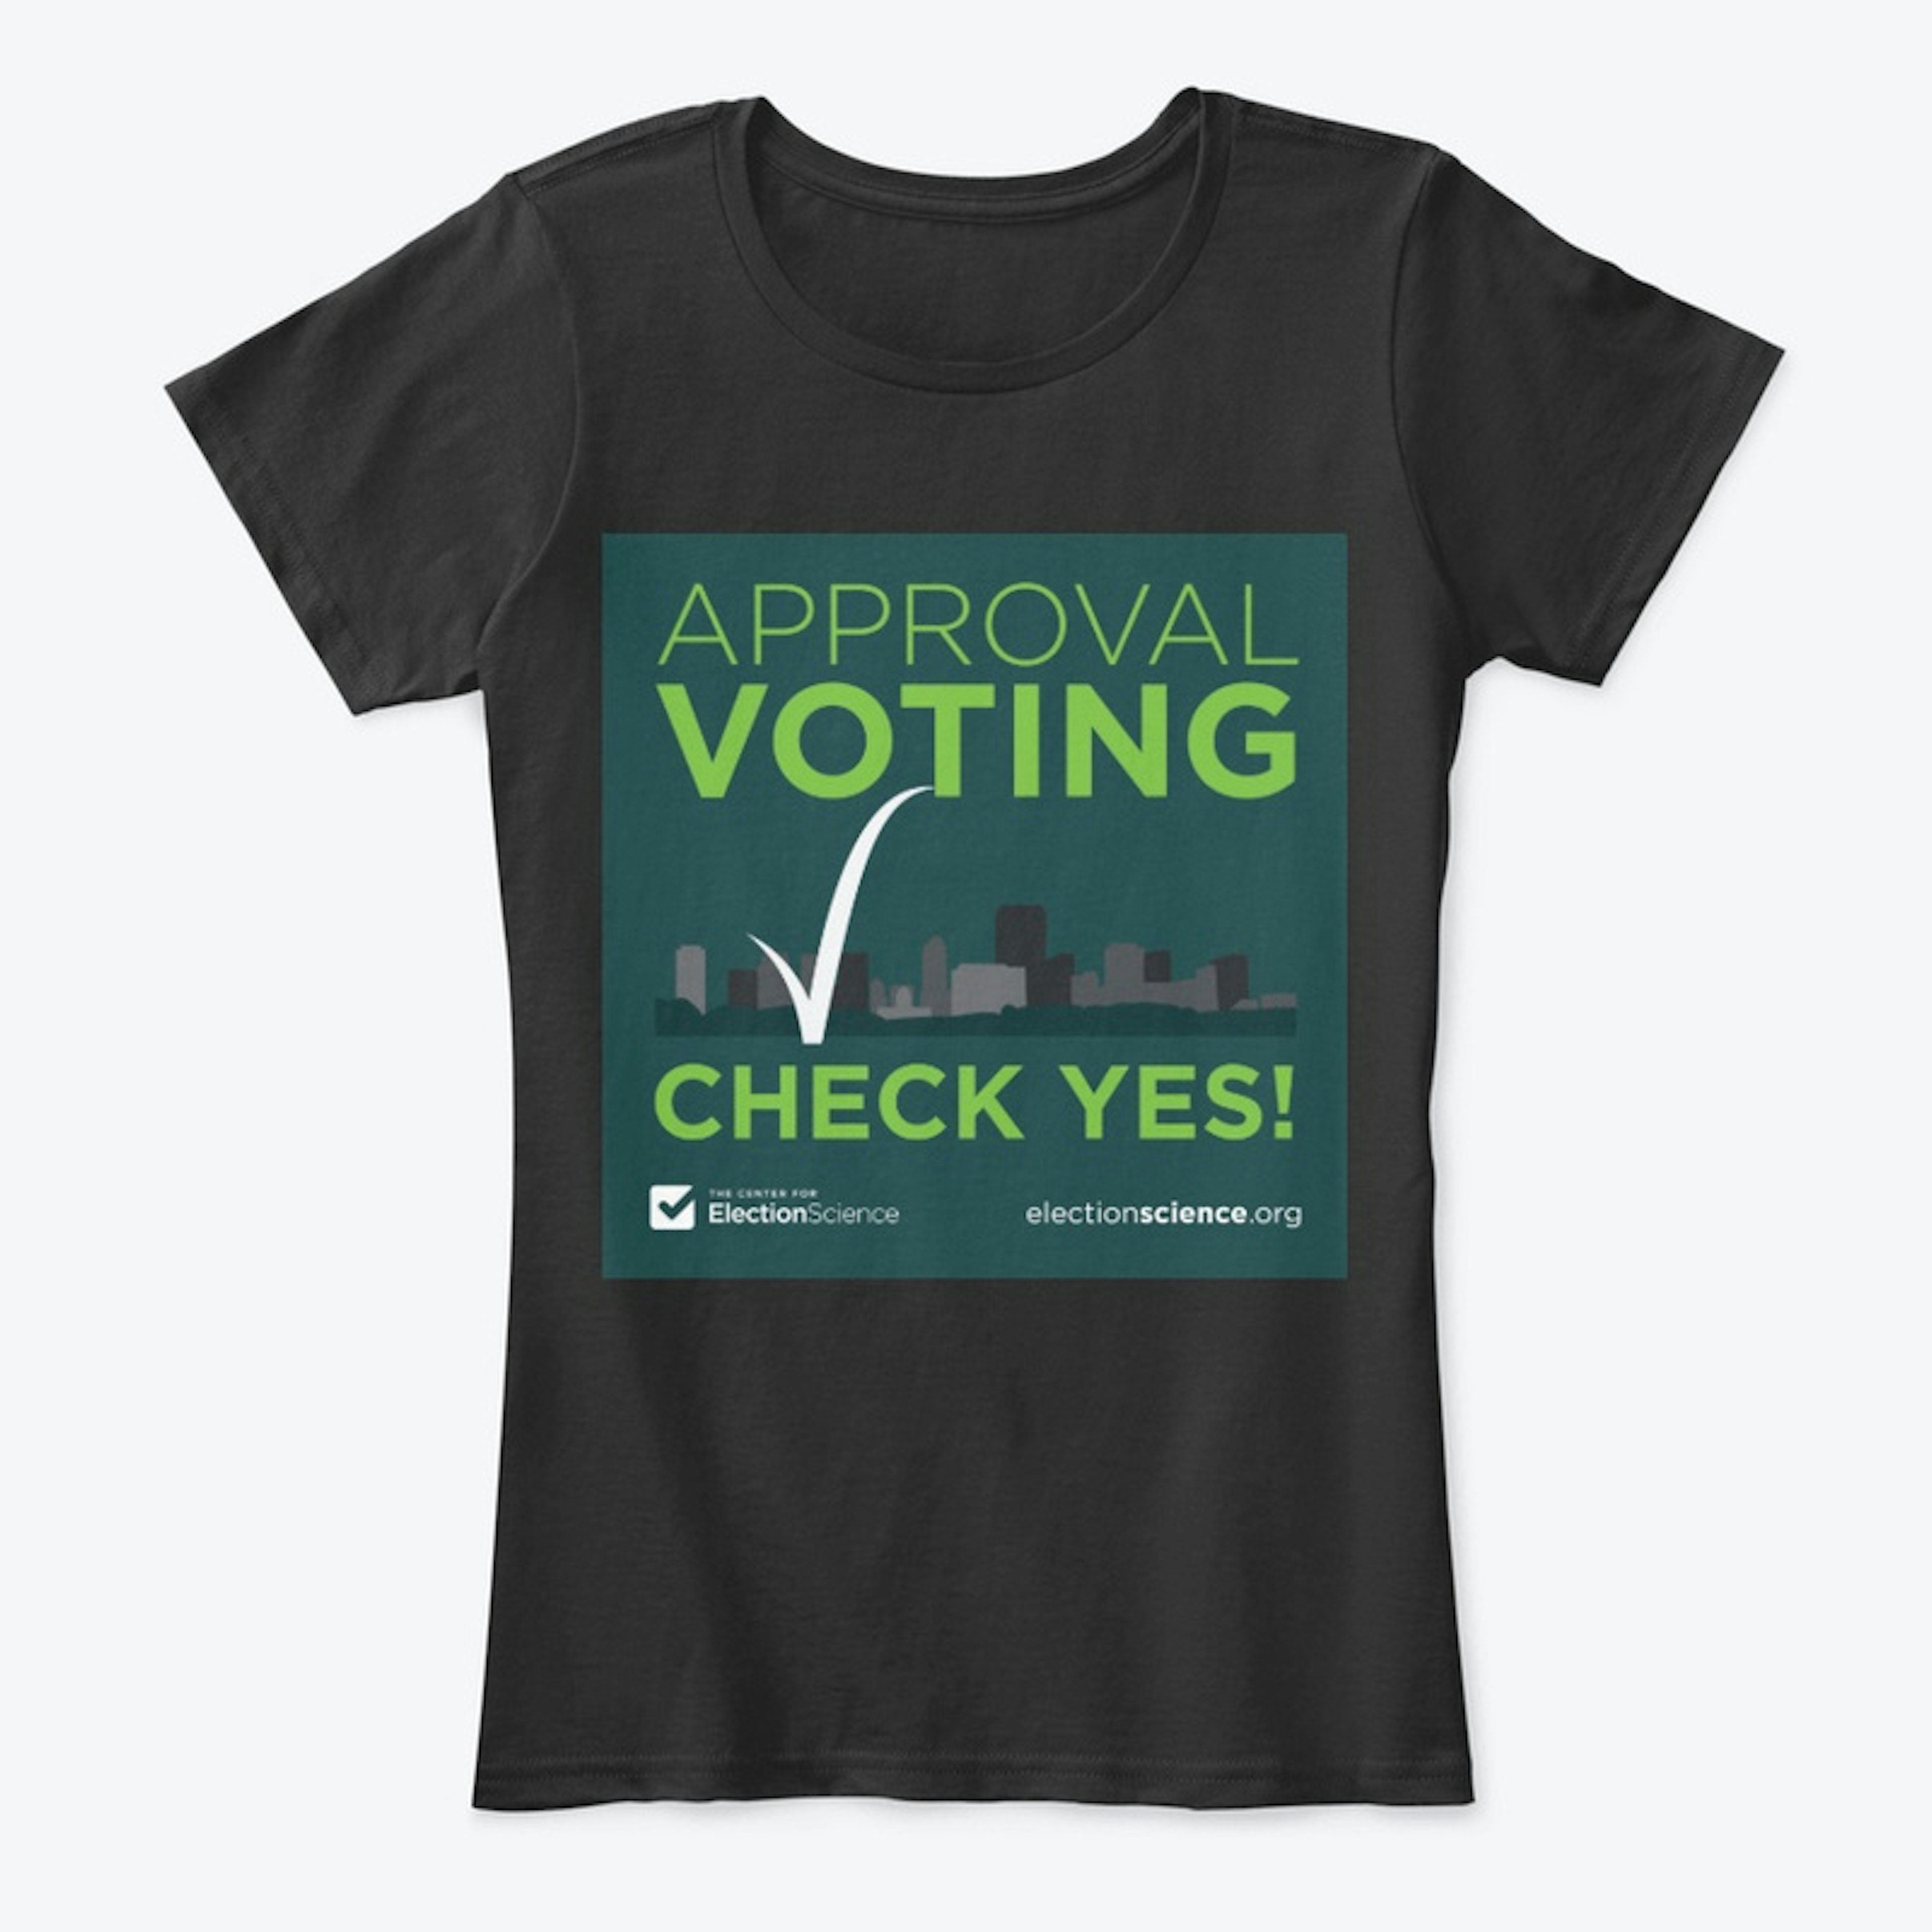 Check Yes! For Approval Voting